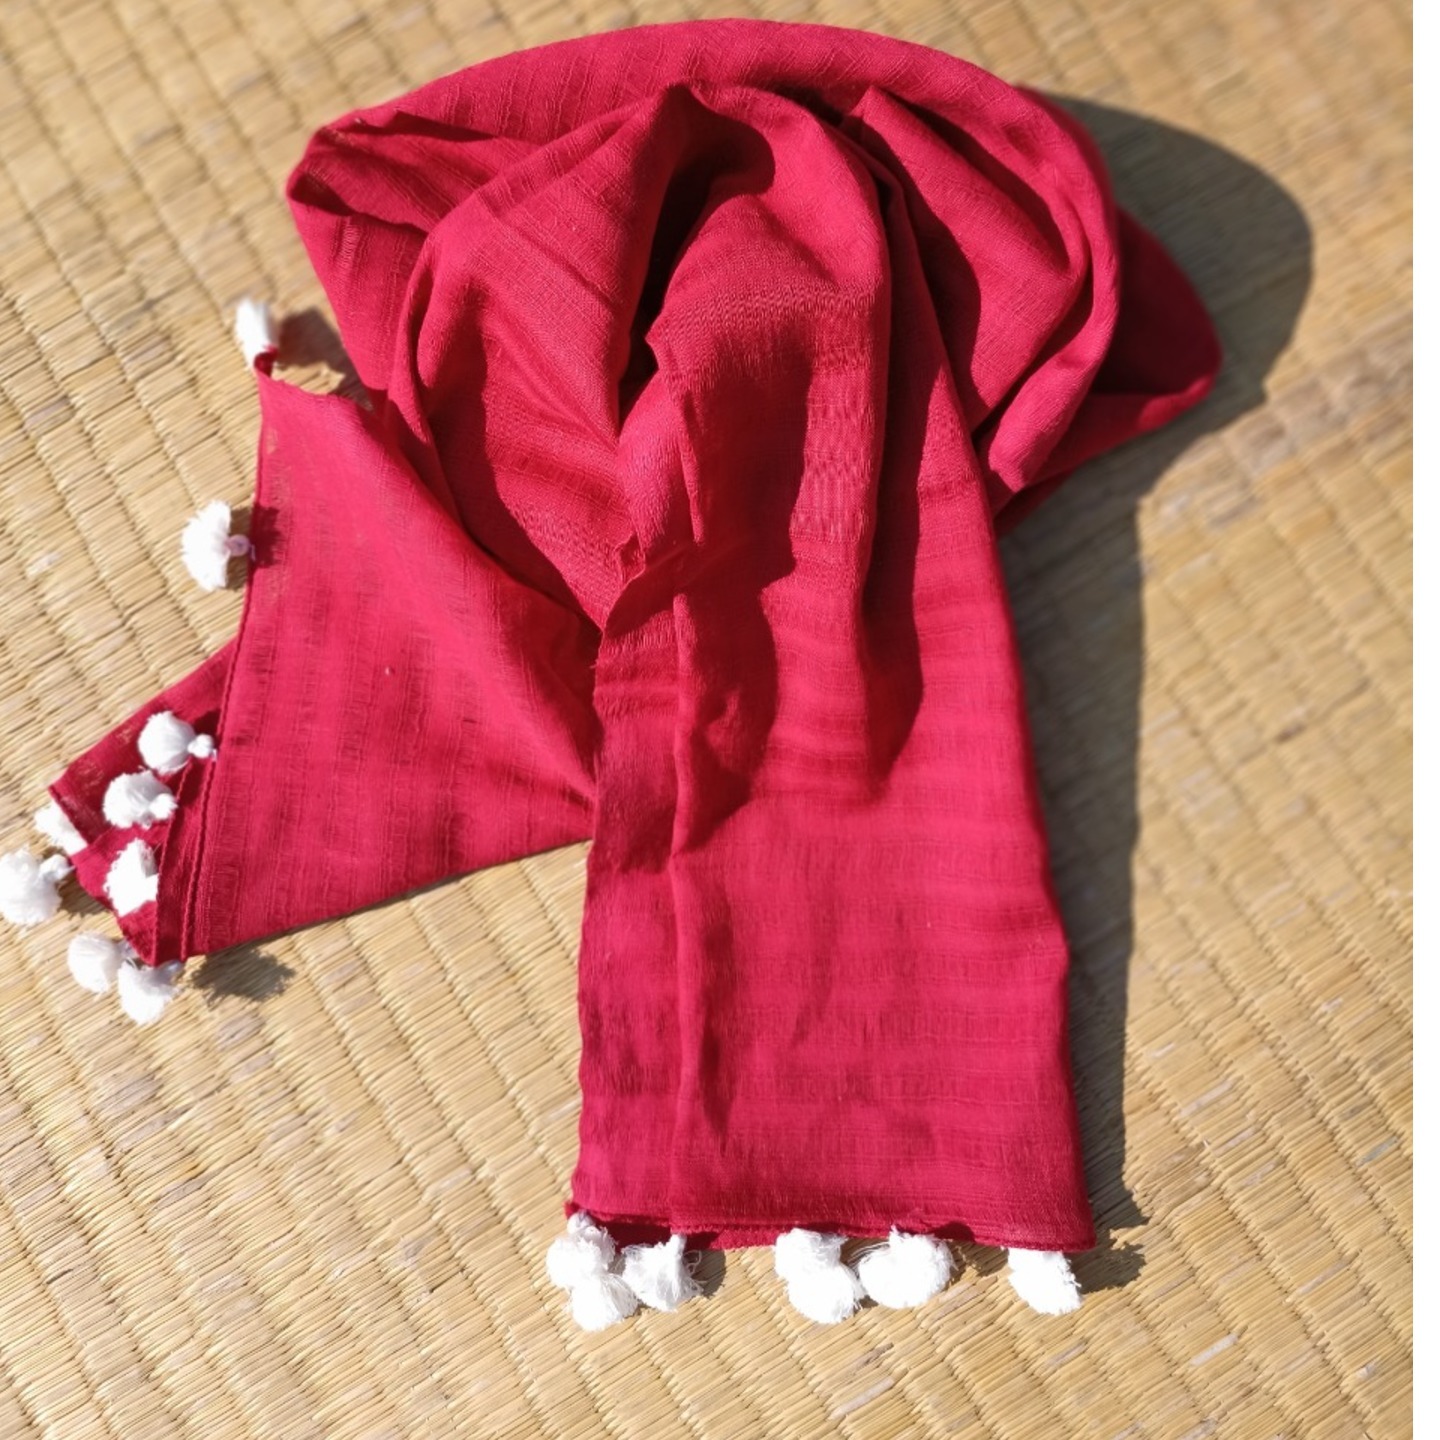 Red jali Stole with white tassels